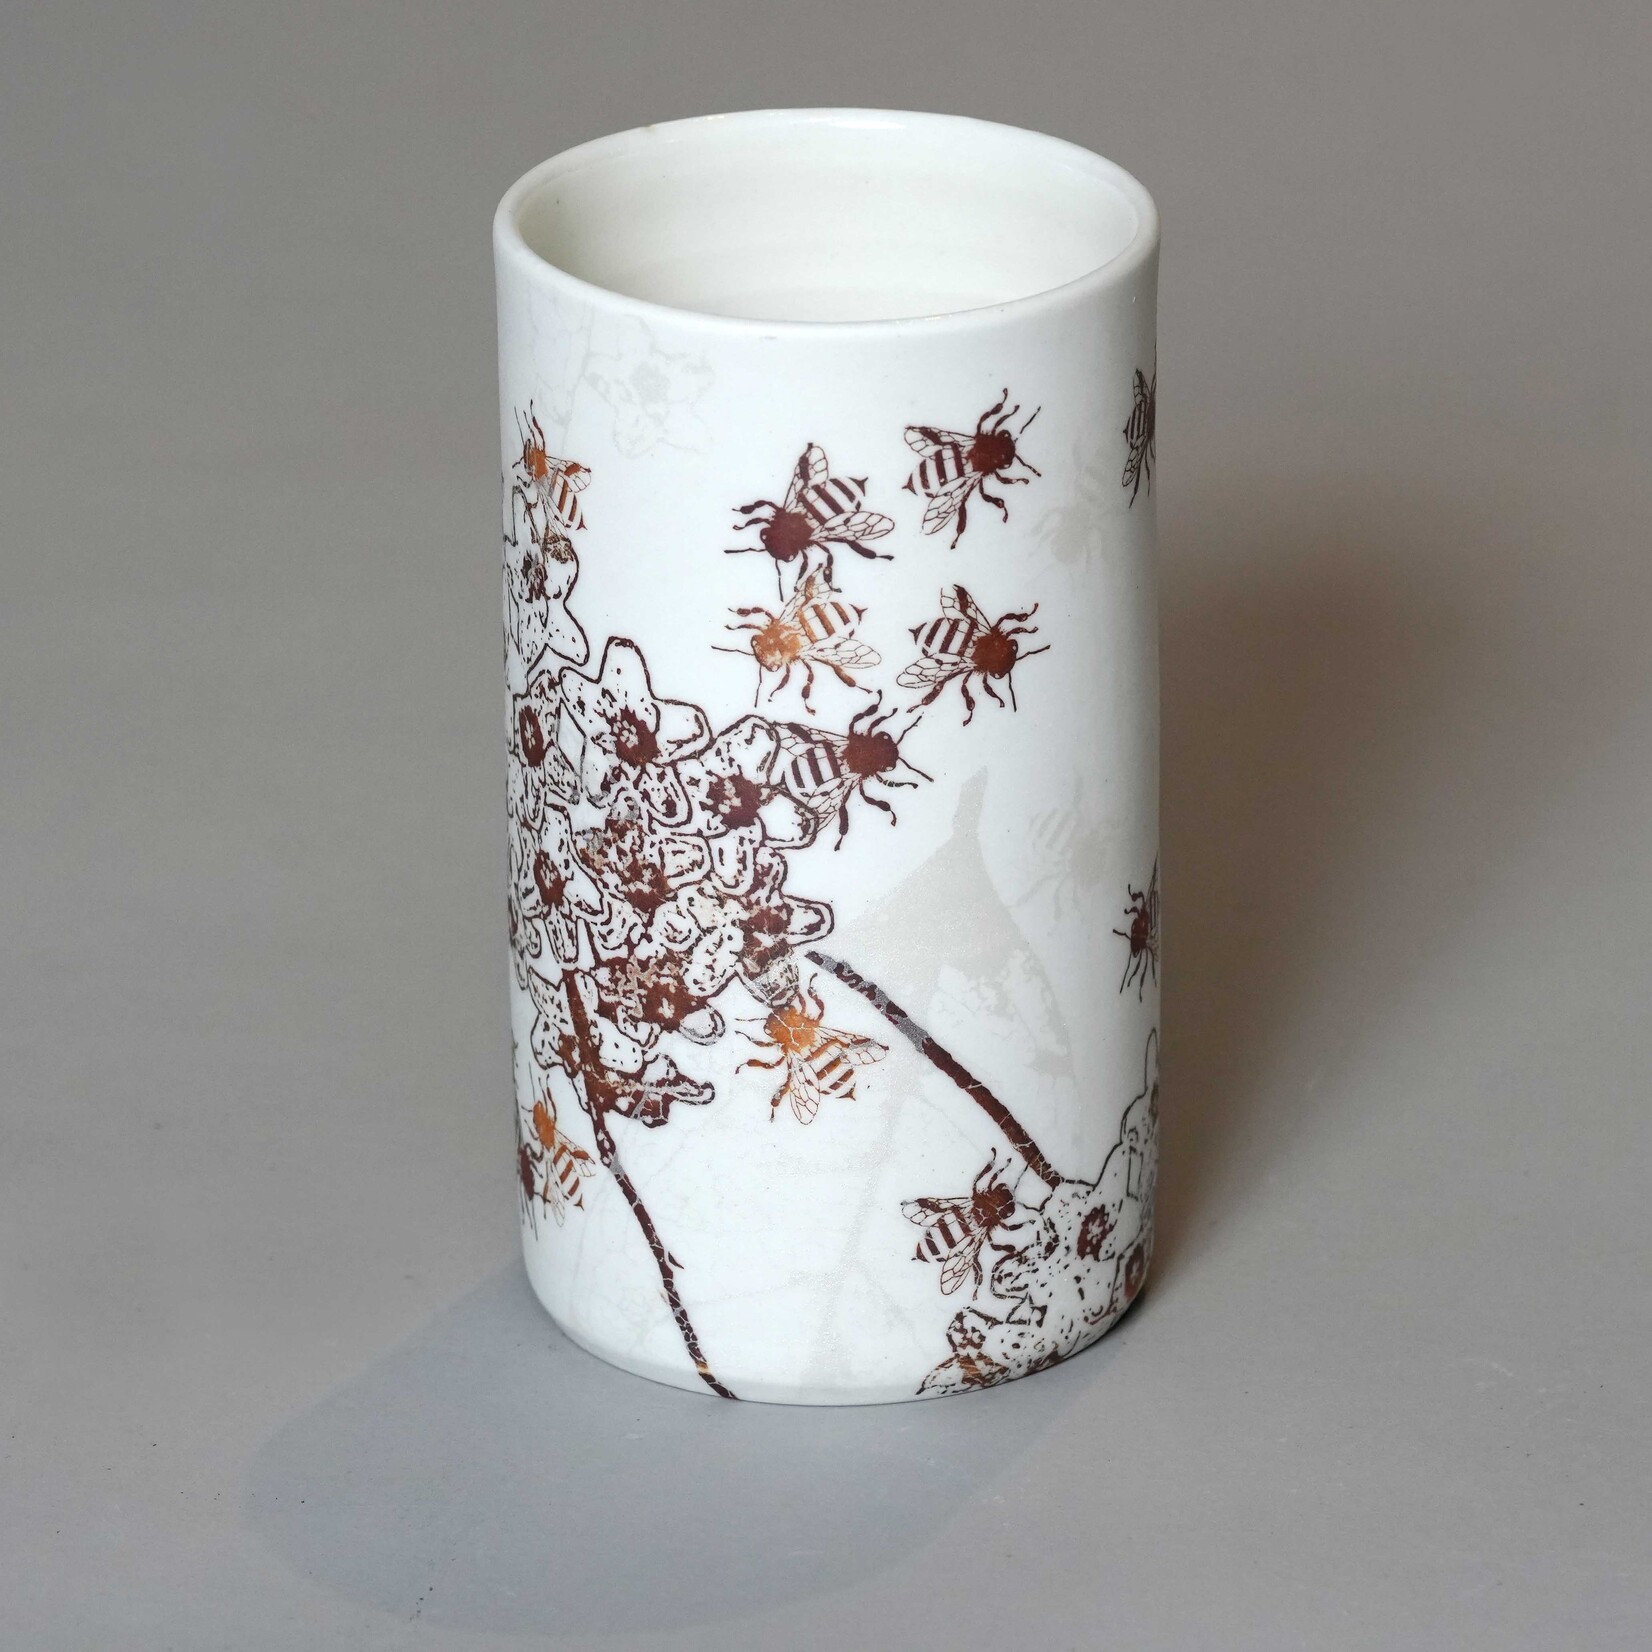 Mollie Bosworth, Vase with Native Bees | Porcelain